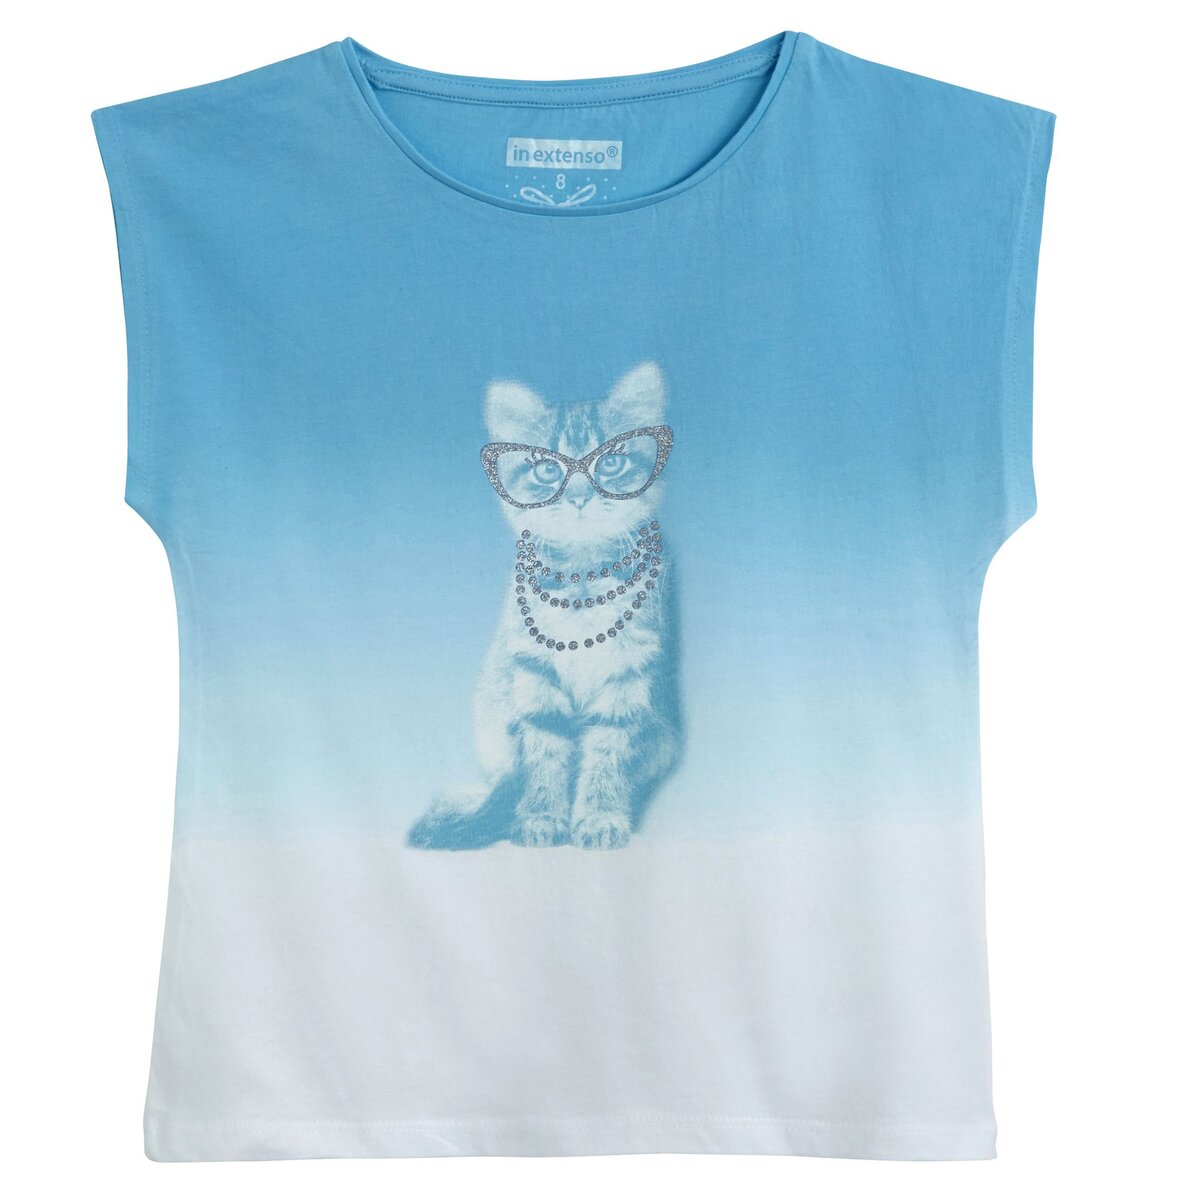 IN EXTENSO Tee-shirt manches courtes chat fille